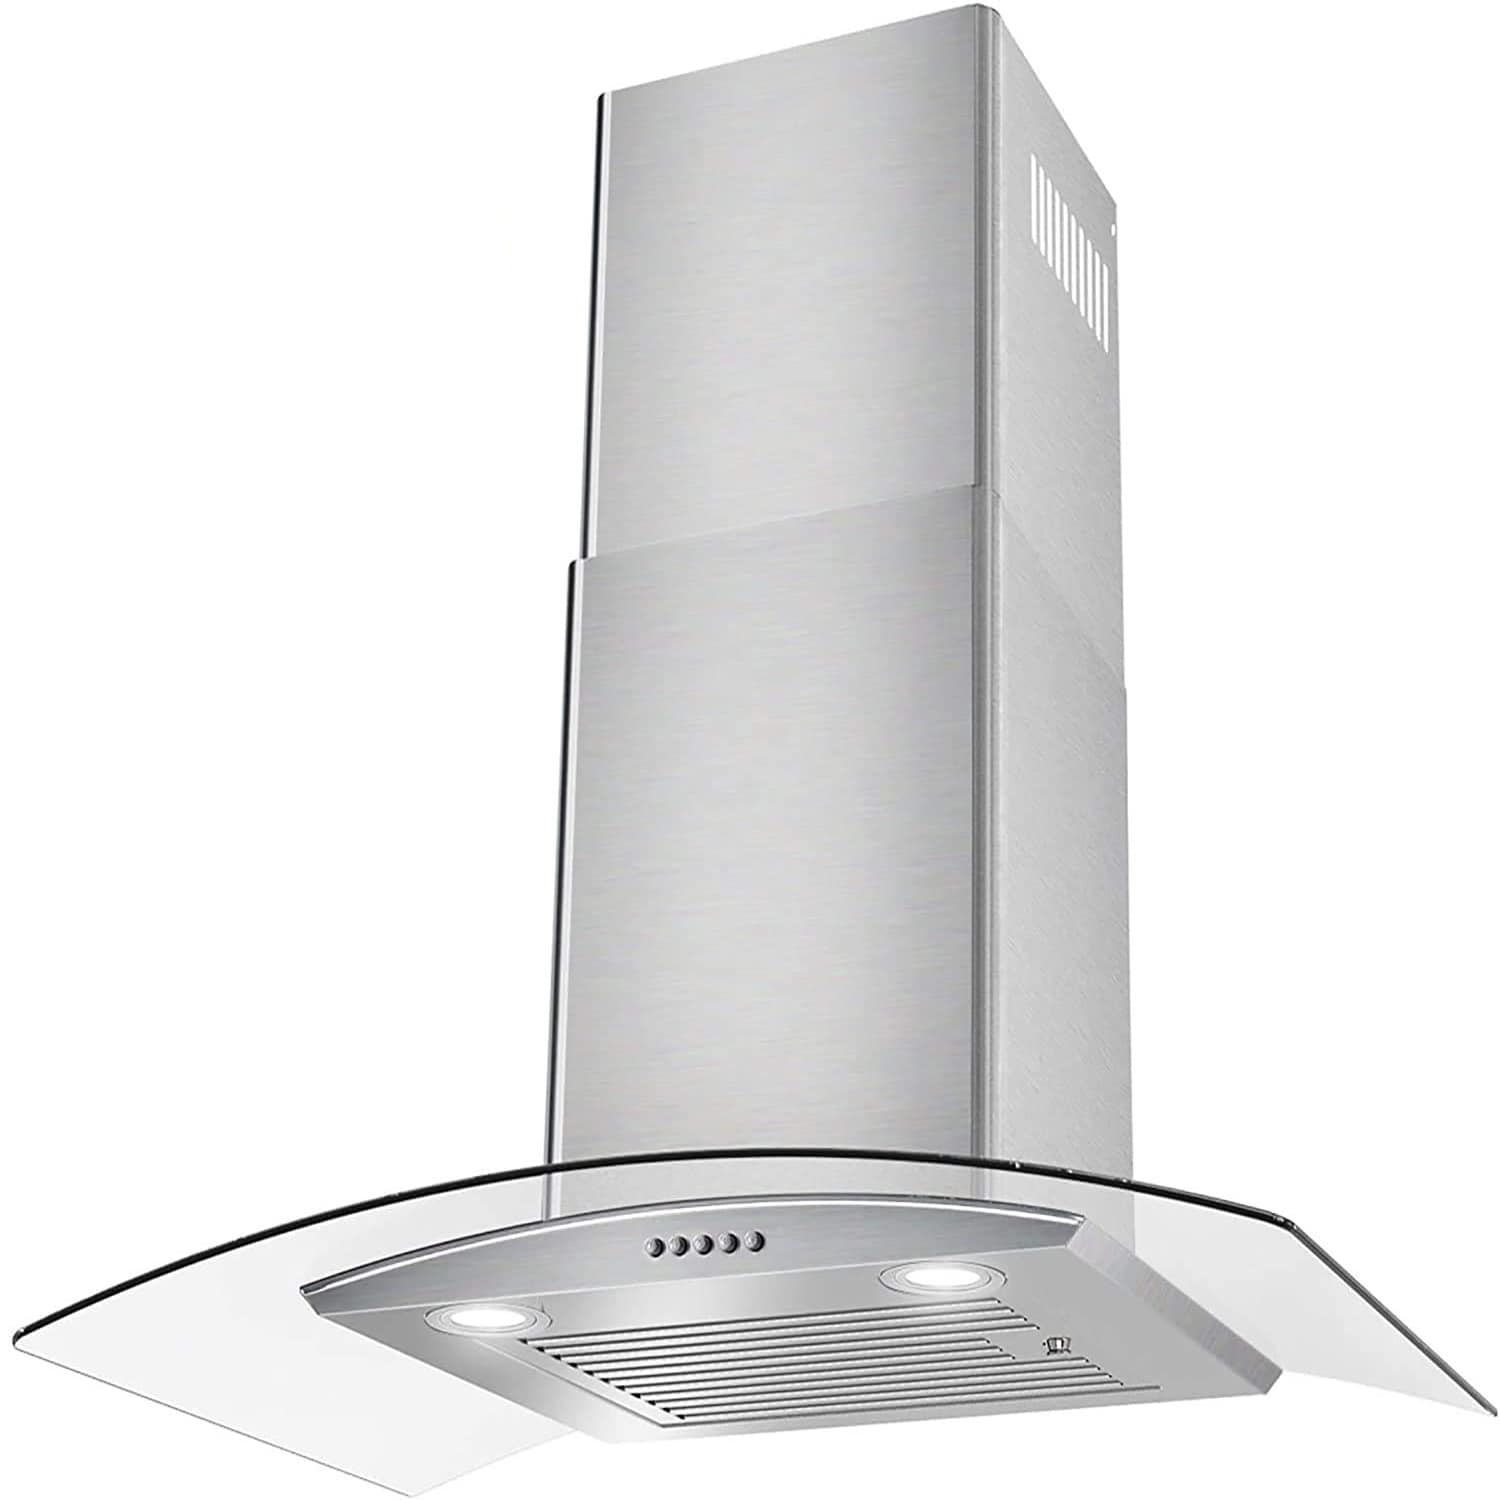 36 inch Range Hood Wall Mounted 450CFM Stainless Steel Stove Vent 3-Filters  New